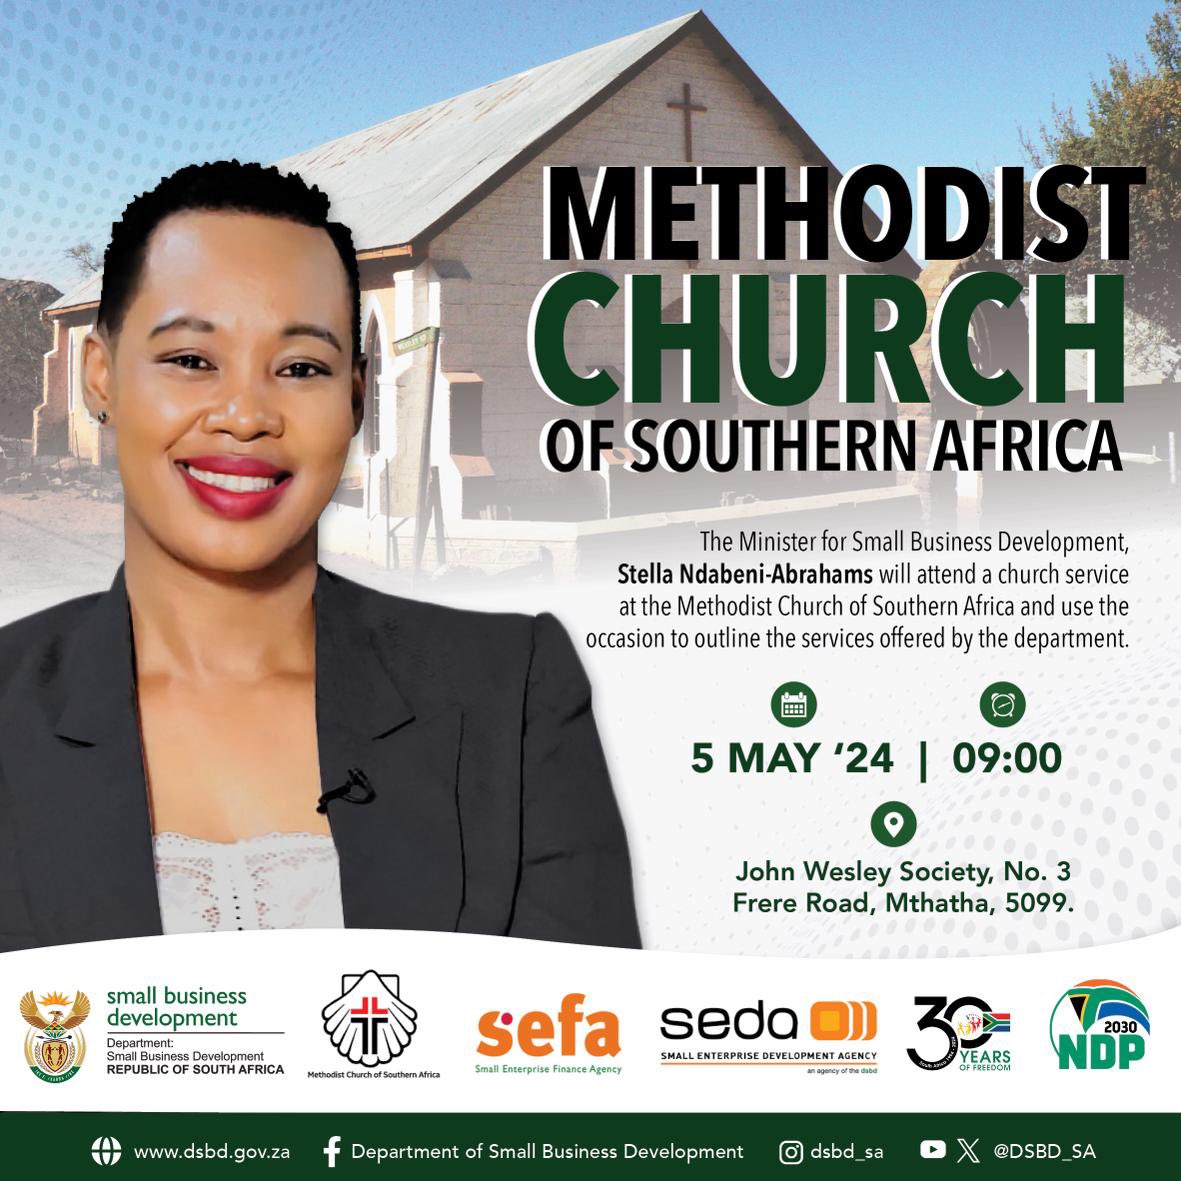 The Minister for Small Business Development, Ms Stella Ndabeni-Abrahams will attend a church service at the Methodist Church of Southern Africa and use the occasion to outline the services offered by the department.